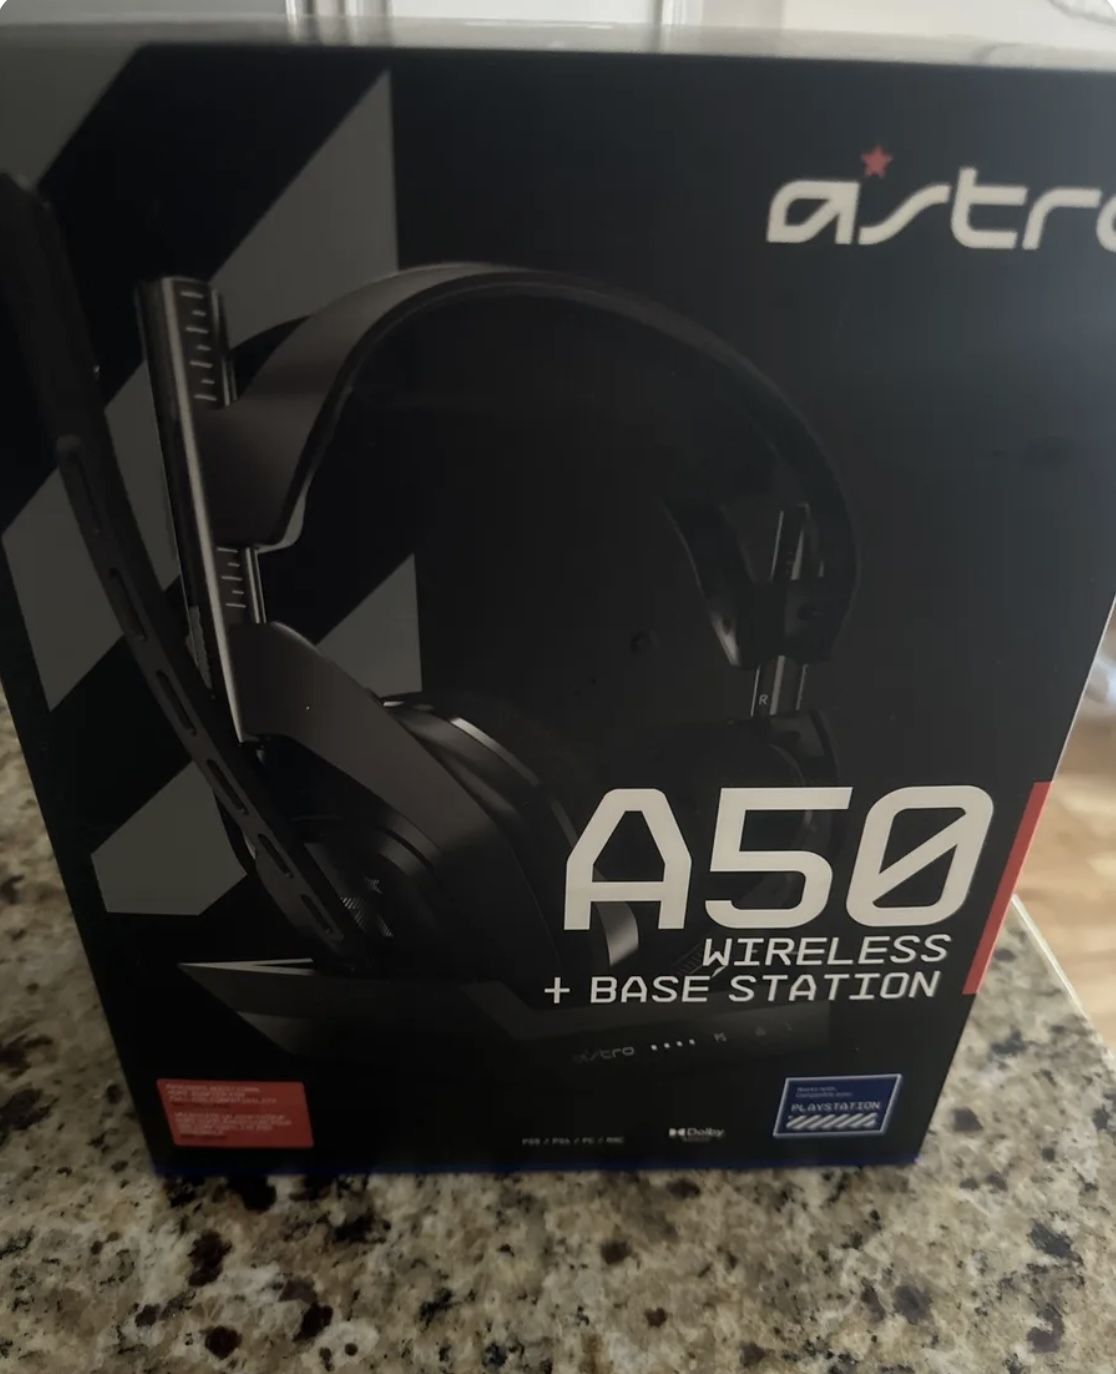 ASTRO A50 X  Gaming headset 